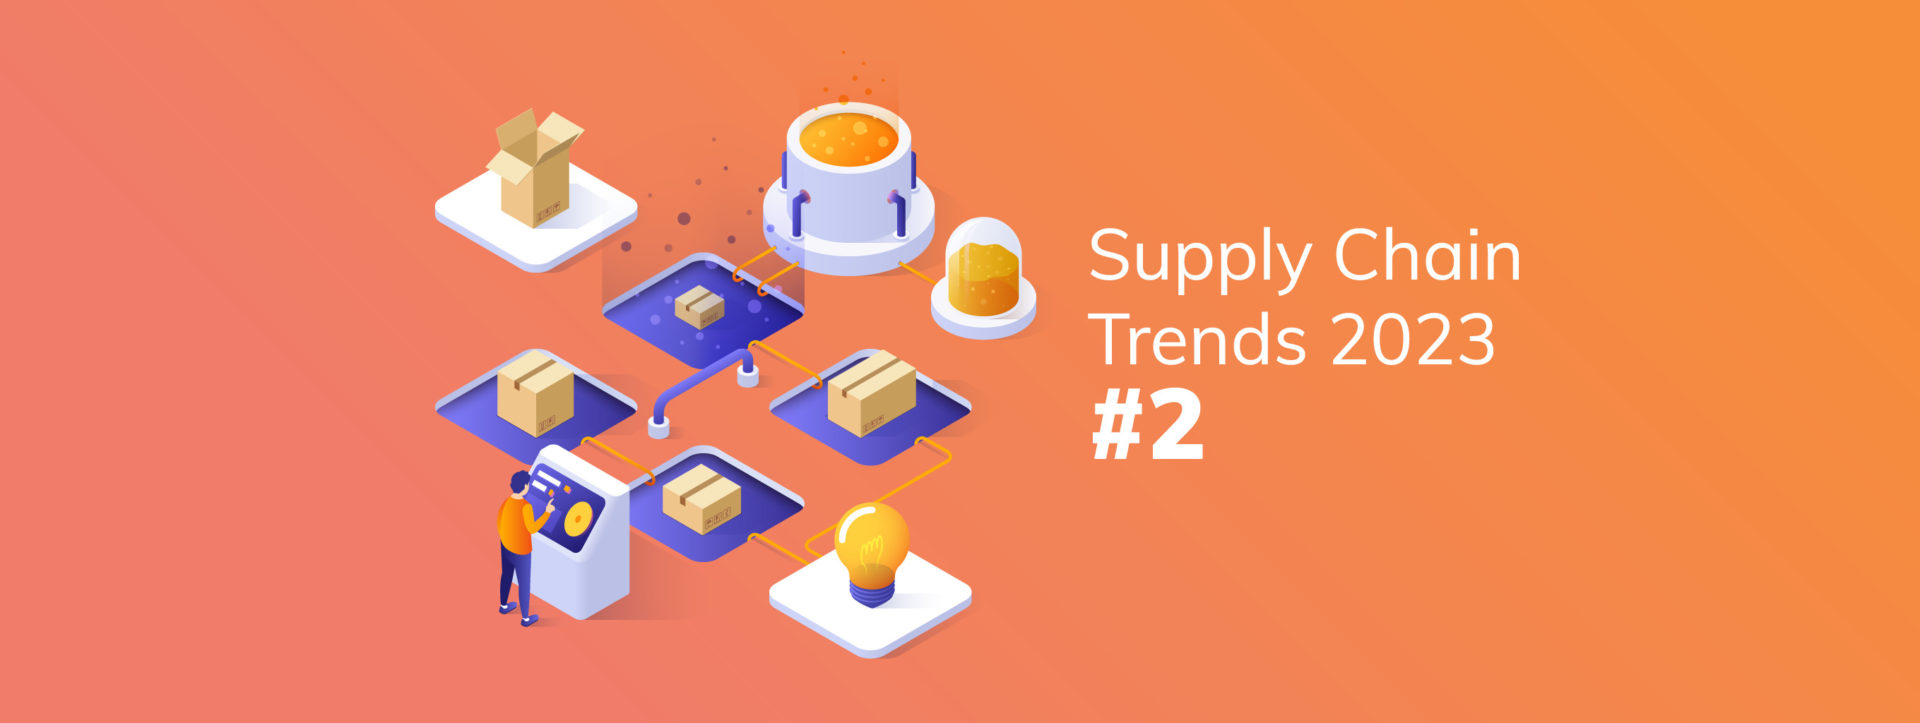 supply chain trends 2023 visibility adaptability